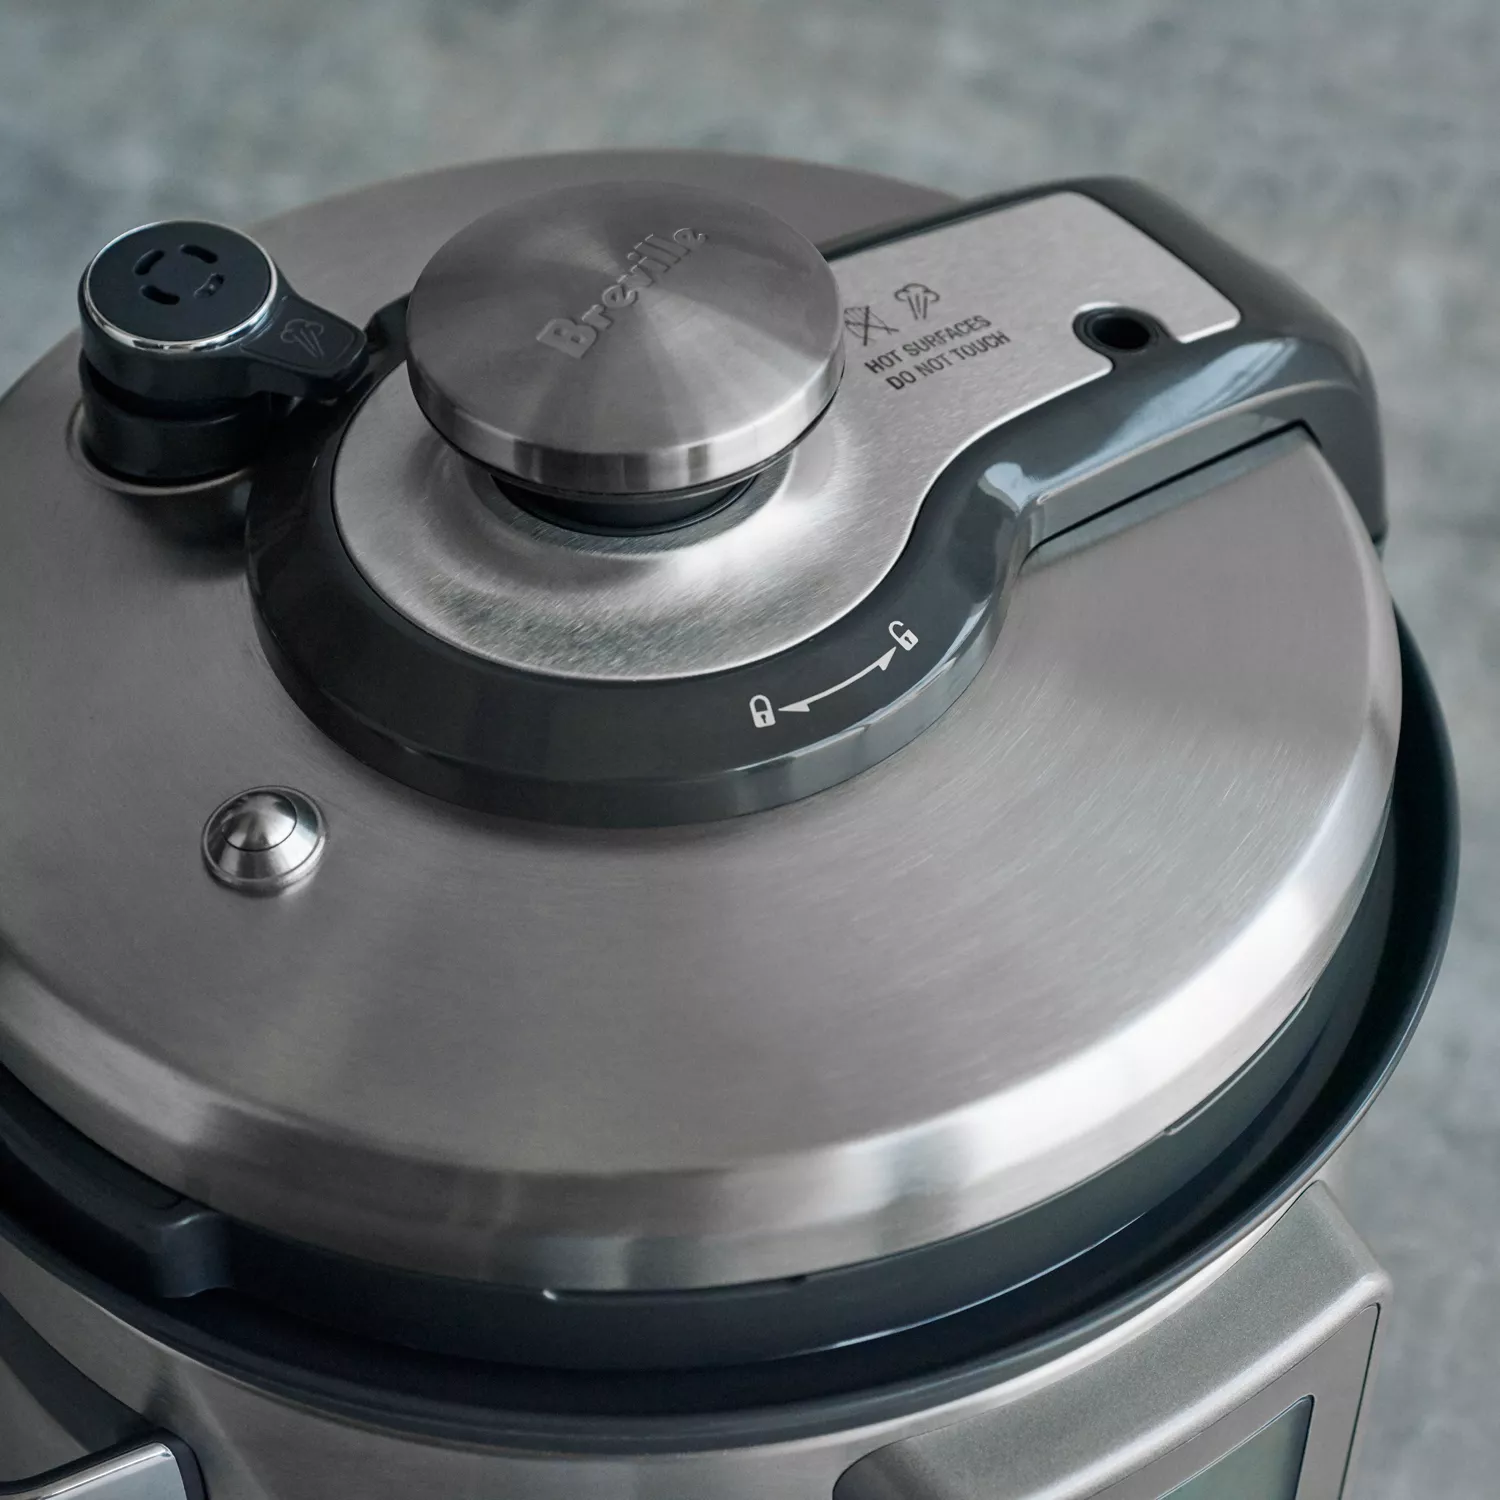 FAGOR CHEF extreme pressure cooker fast. Thermos diffuser